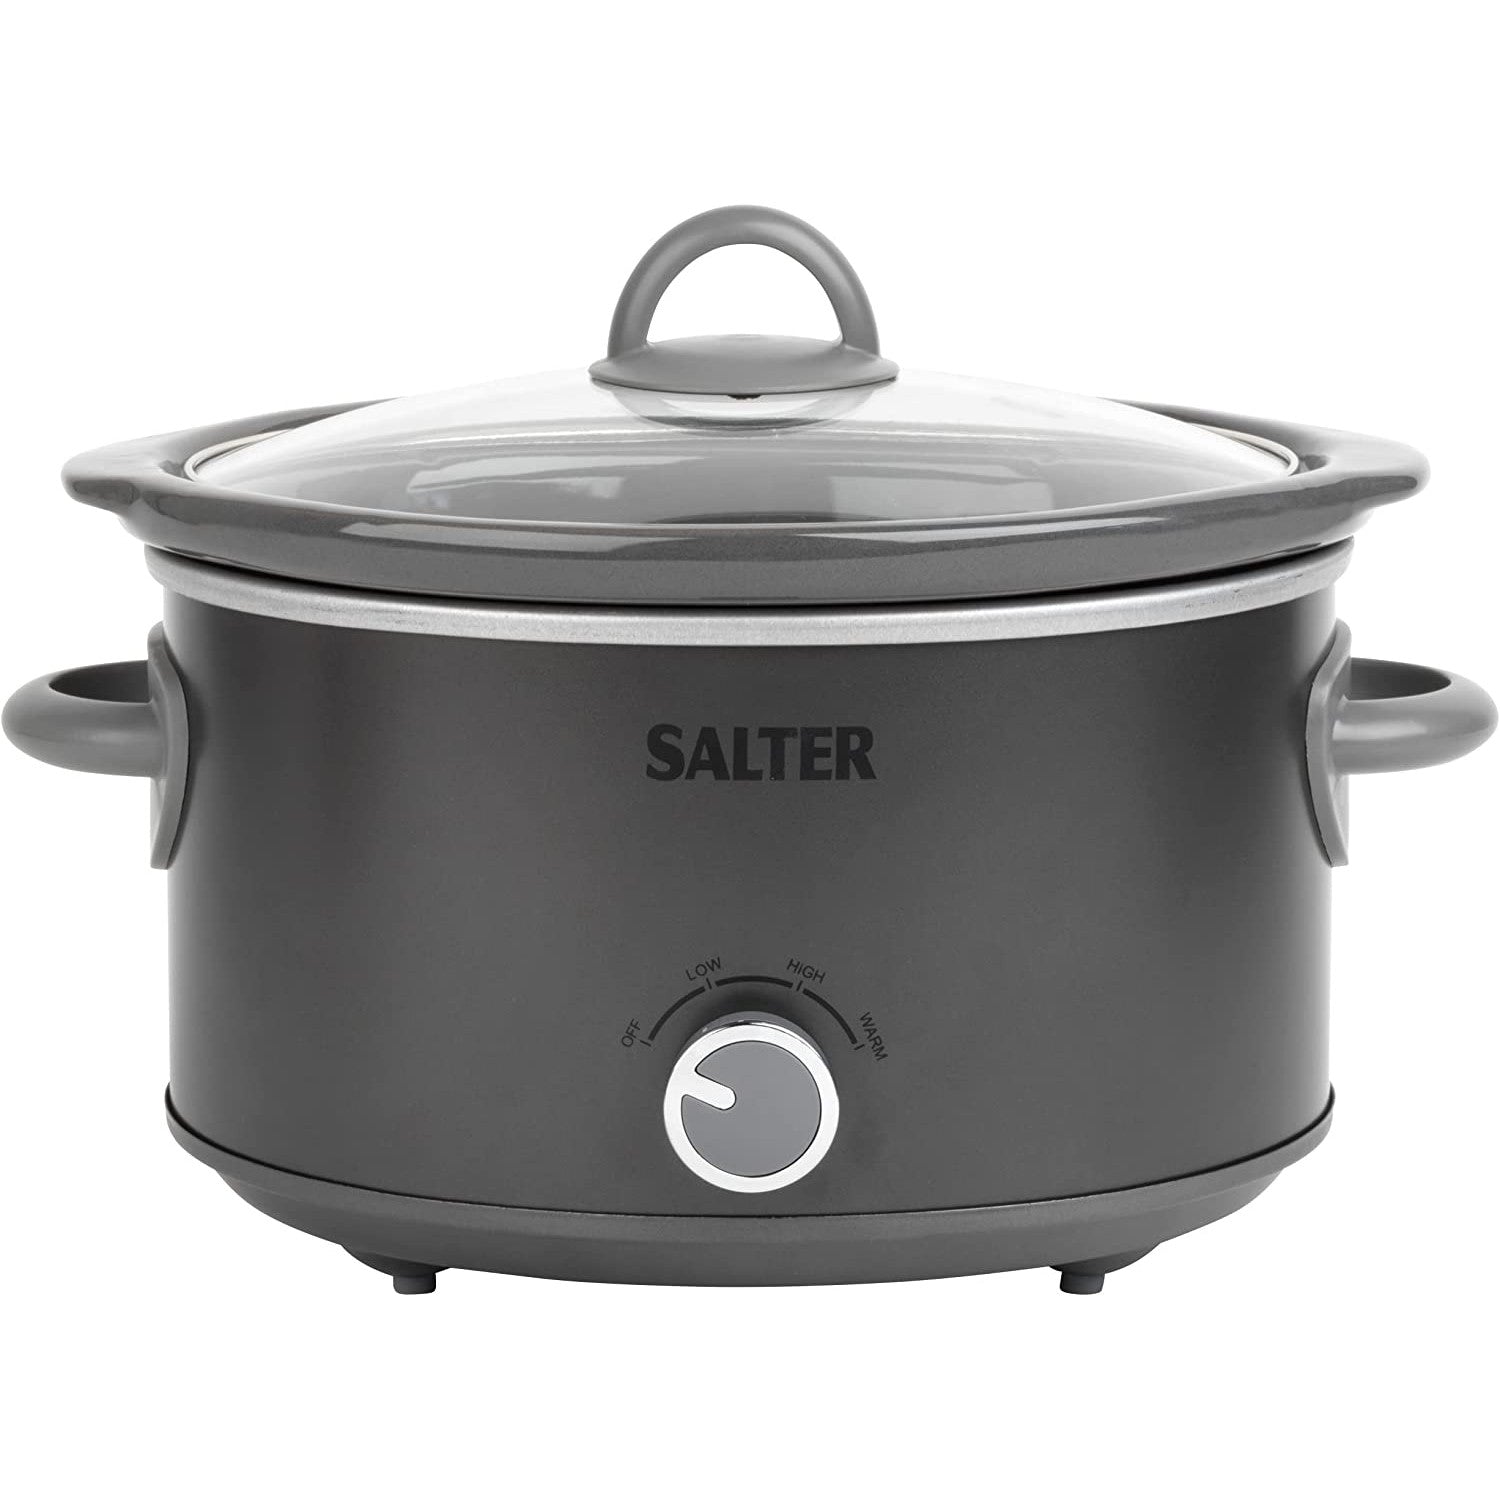 Salter 3.5 Litre Oval Slow Cooker with Removable Crockpot